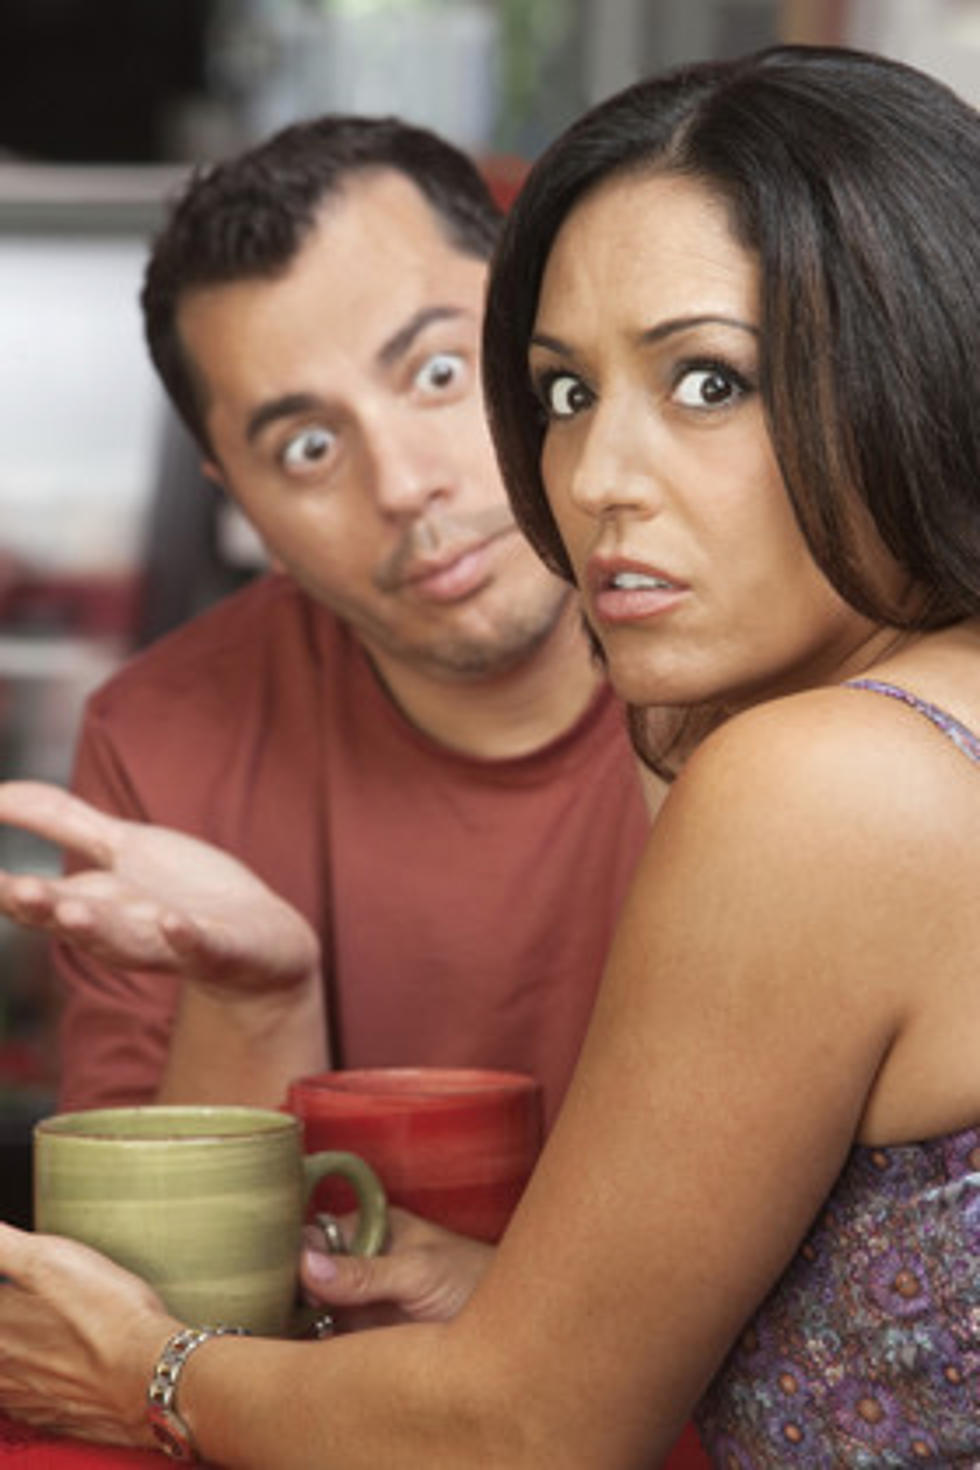 Survey Finds What People Really Want In A Spouse